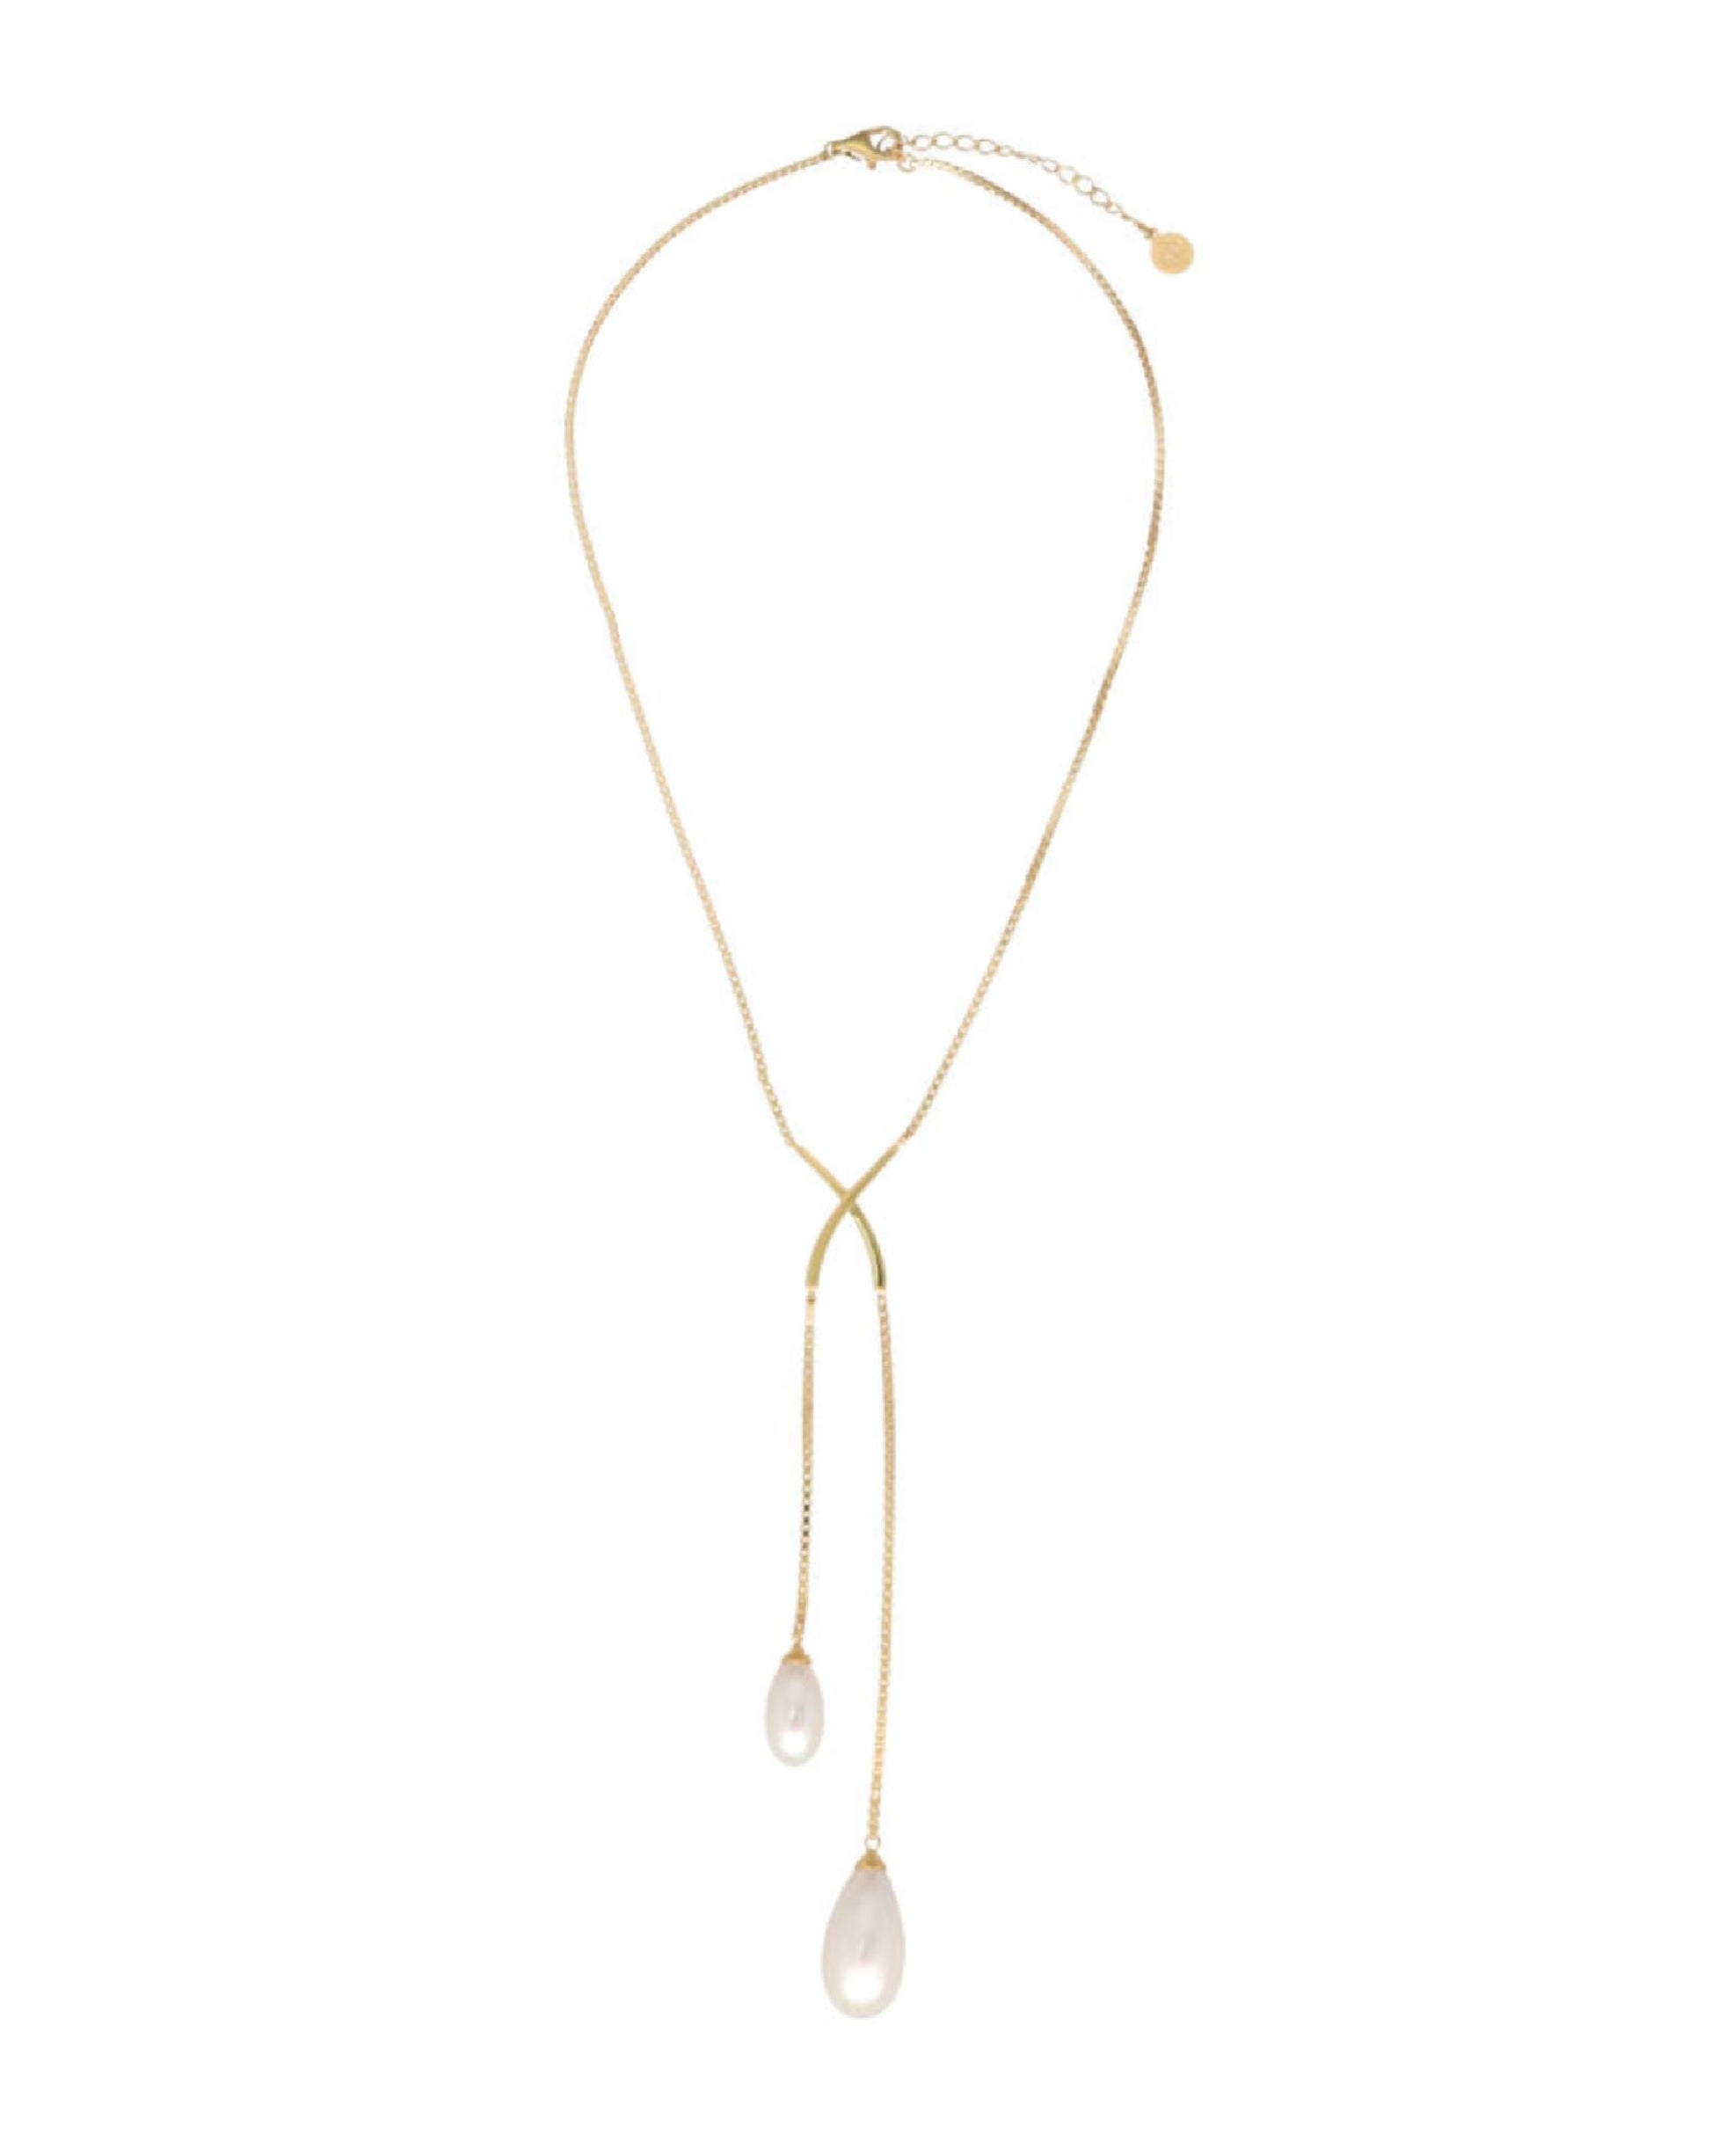 Majorica 16587,01,1,000,010,1 . Necklace White Pearl Tender, MAJ-787, Yellow gold plated Necklaces